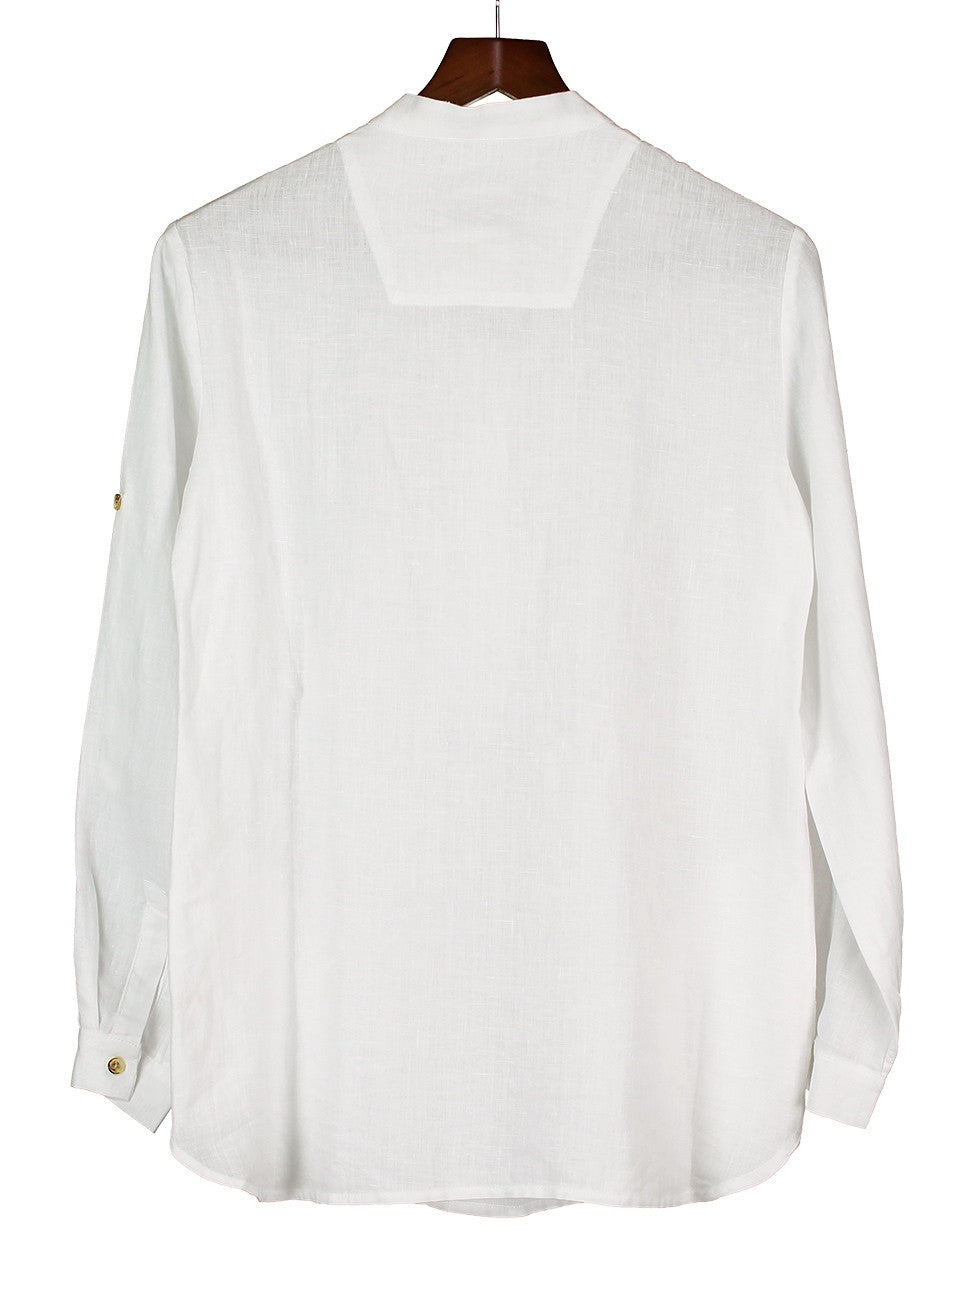 NEW TUNIC IN WHITE LINEN, Shirt, Hickman & Bousfield - Hickman & Bousfield, Safari and Travel Clothing